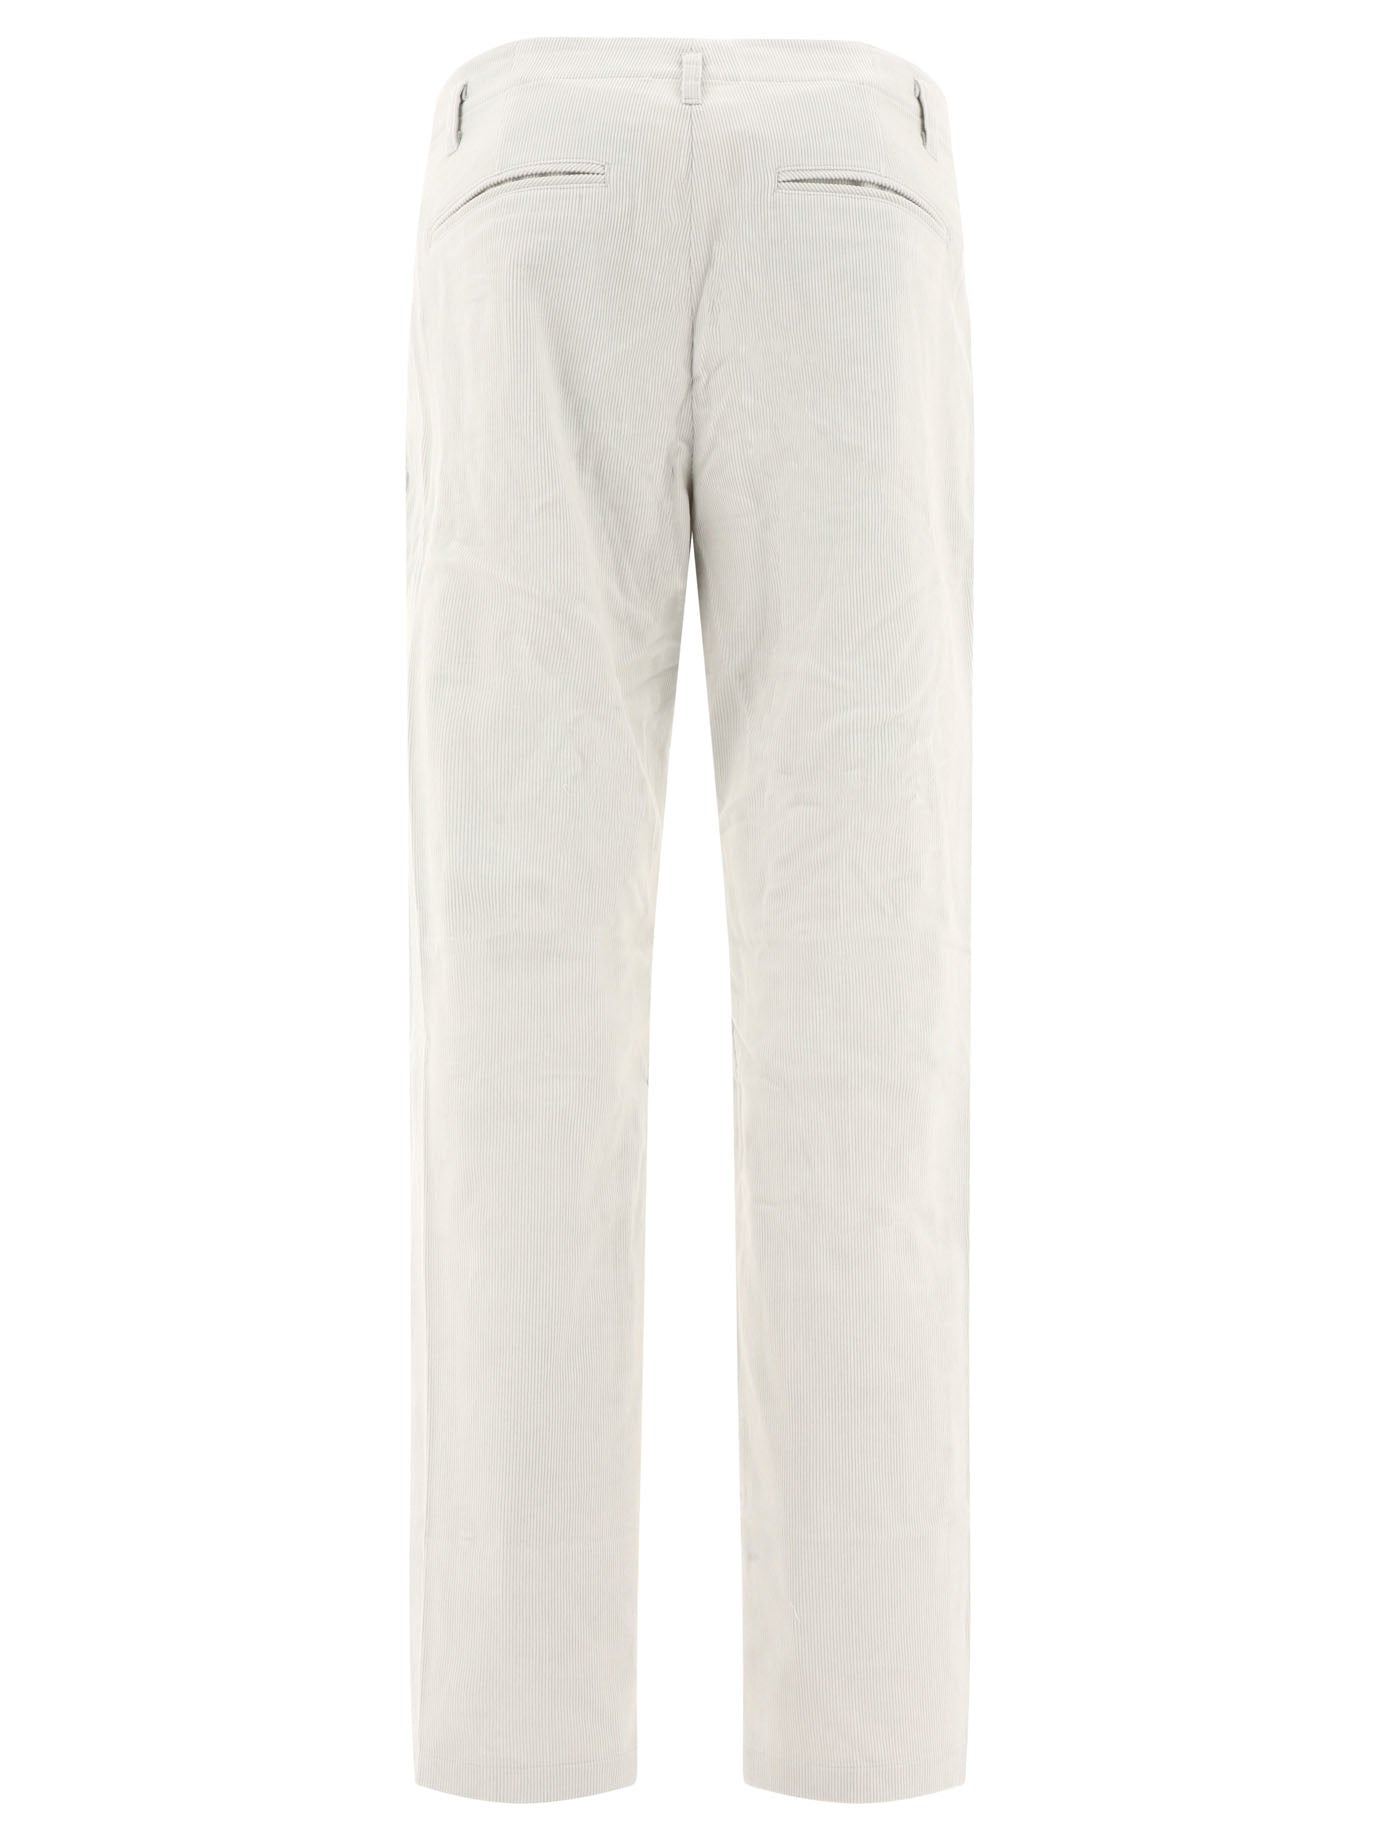 Shop Post Archive Faction (paf) 5.1 Right Trousers Grey